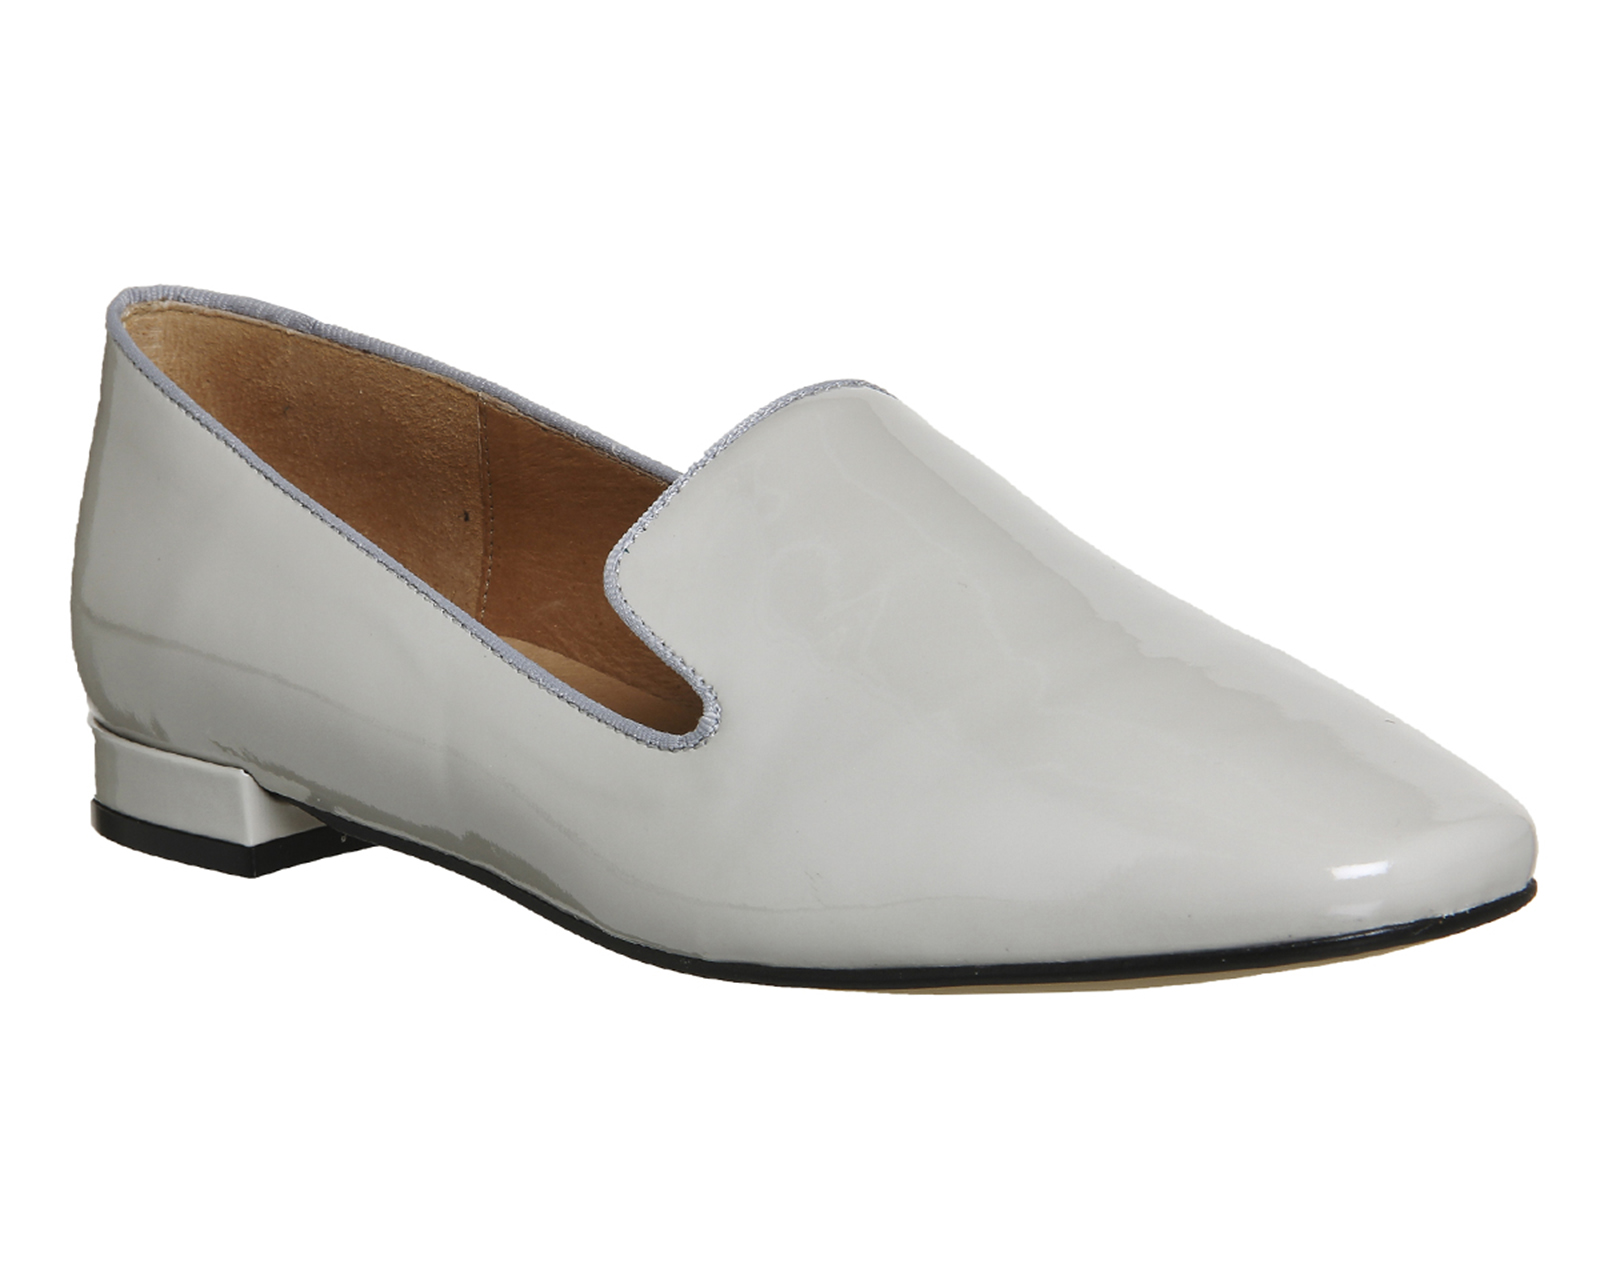 OFFICEDrum Roll Square Toe SlippersGrey Patent Leather